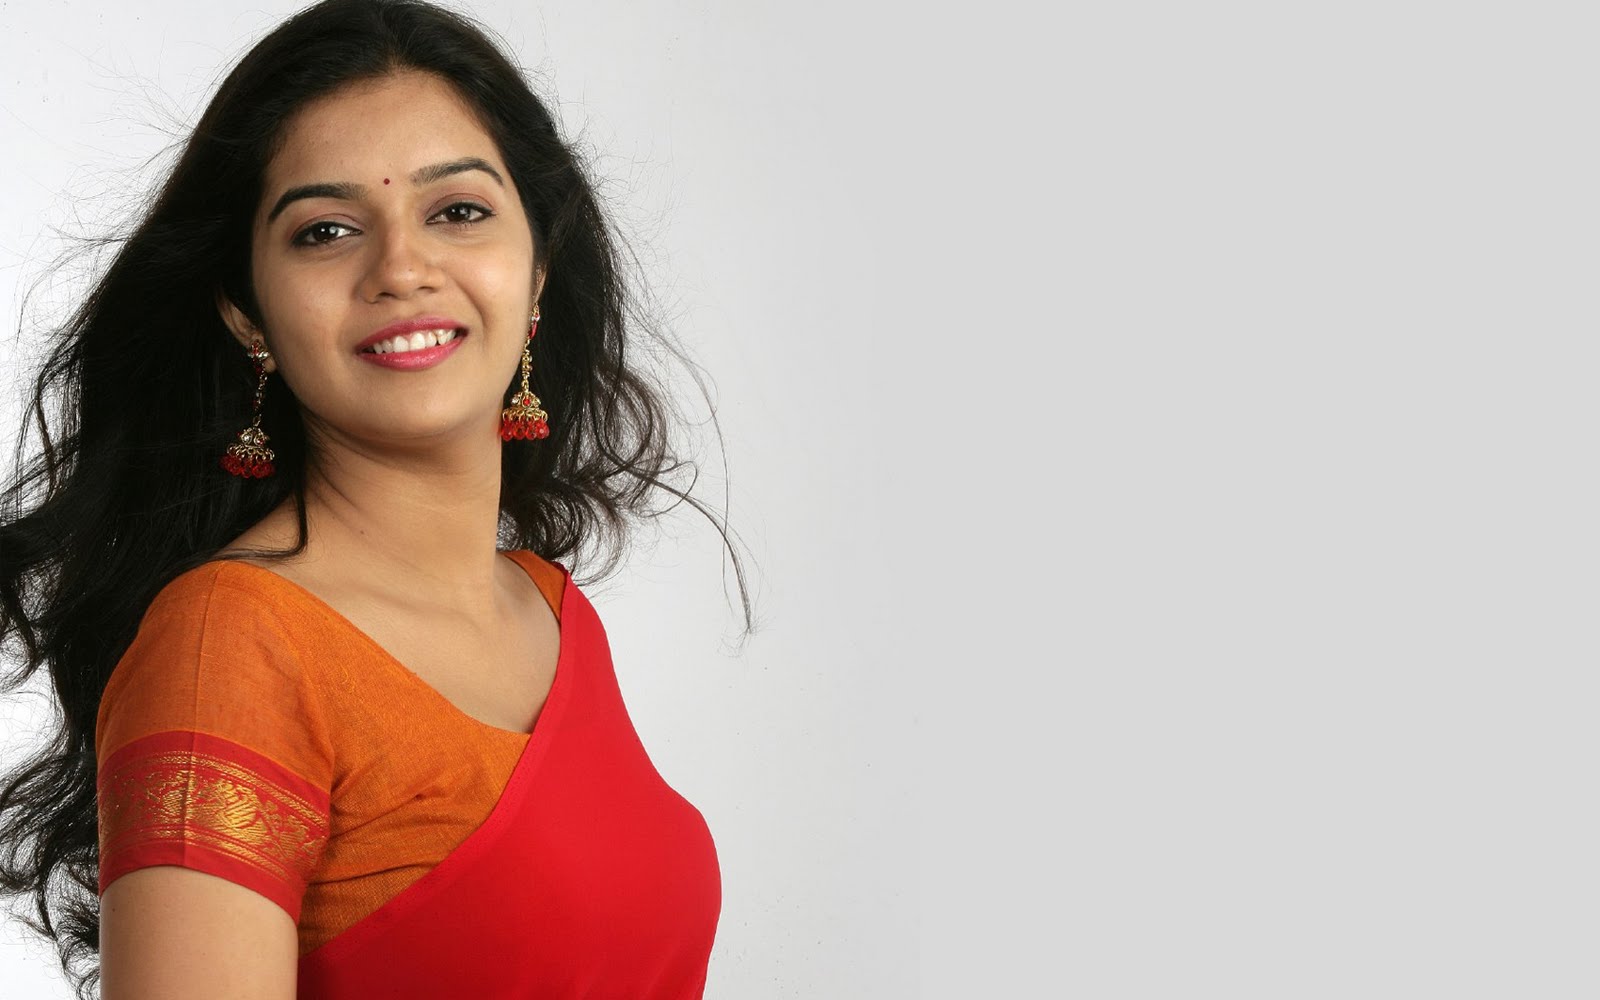 Wallpapers Bollywood Actress - Swathi Hd Images Download - 1600x1000  Wallpaper 